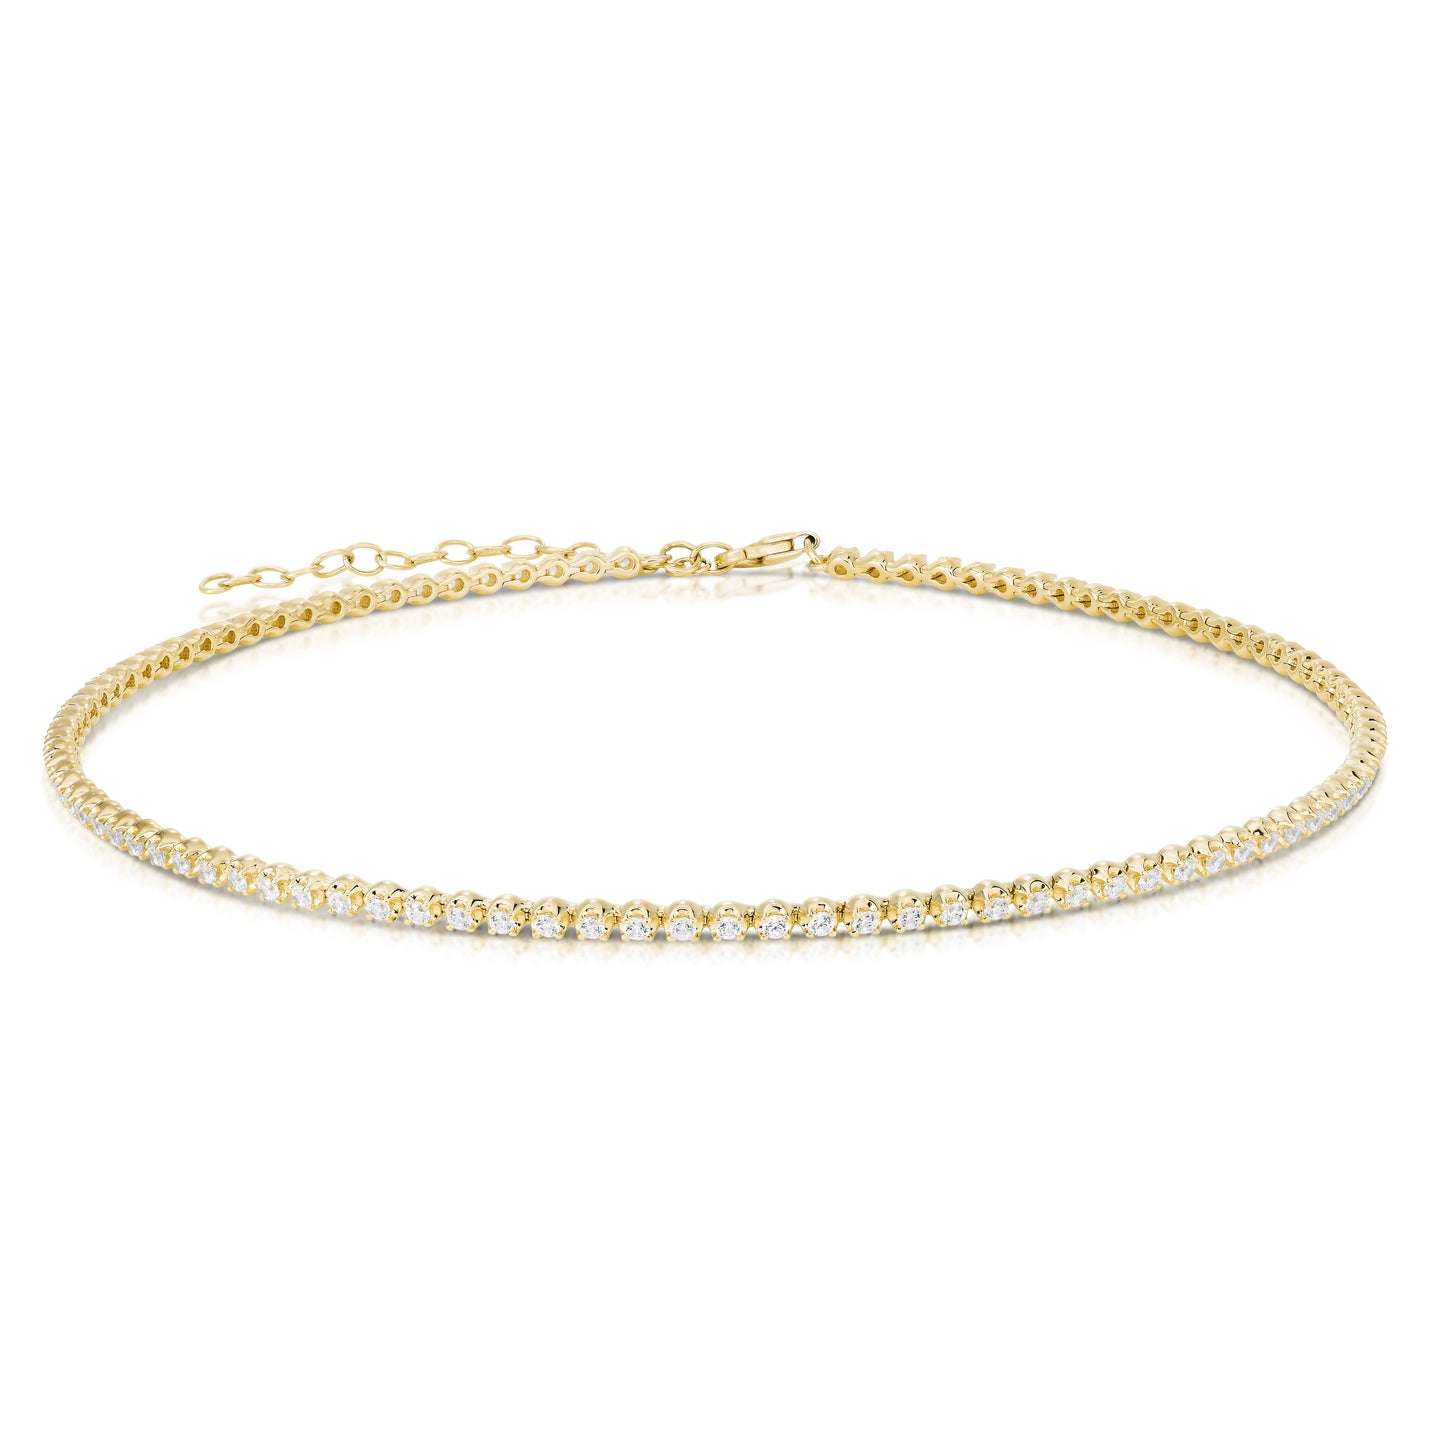 Buttercup Diamond Choker Necklace in 14K Yellow Gold